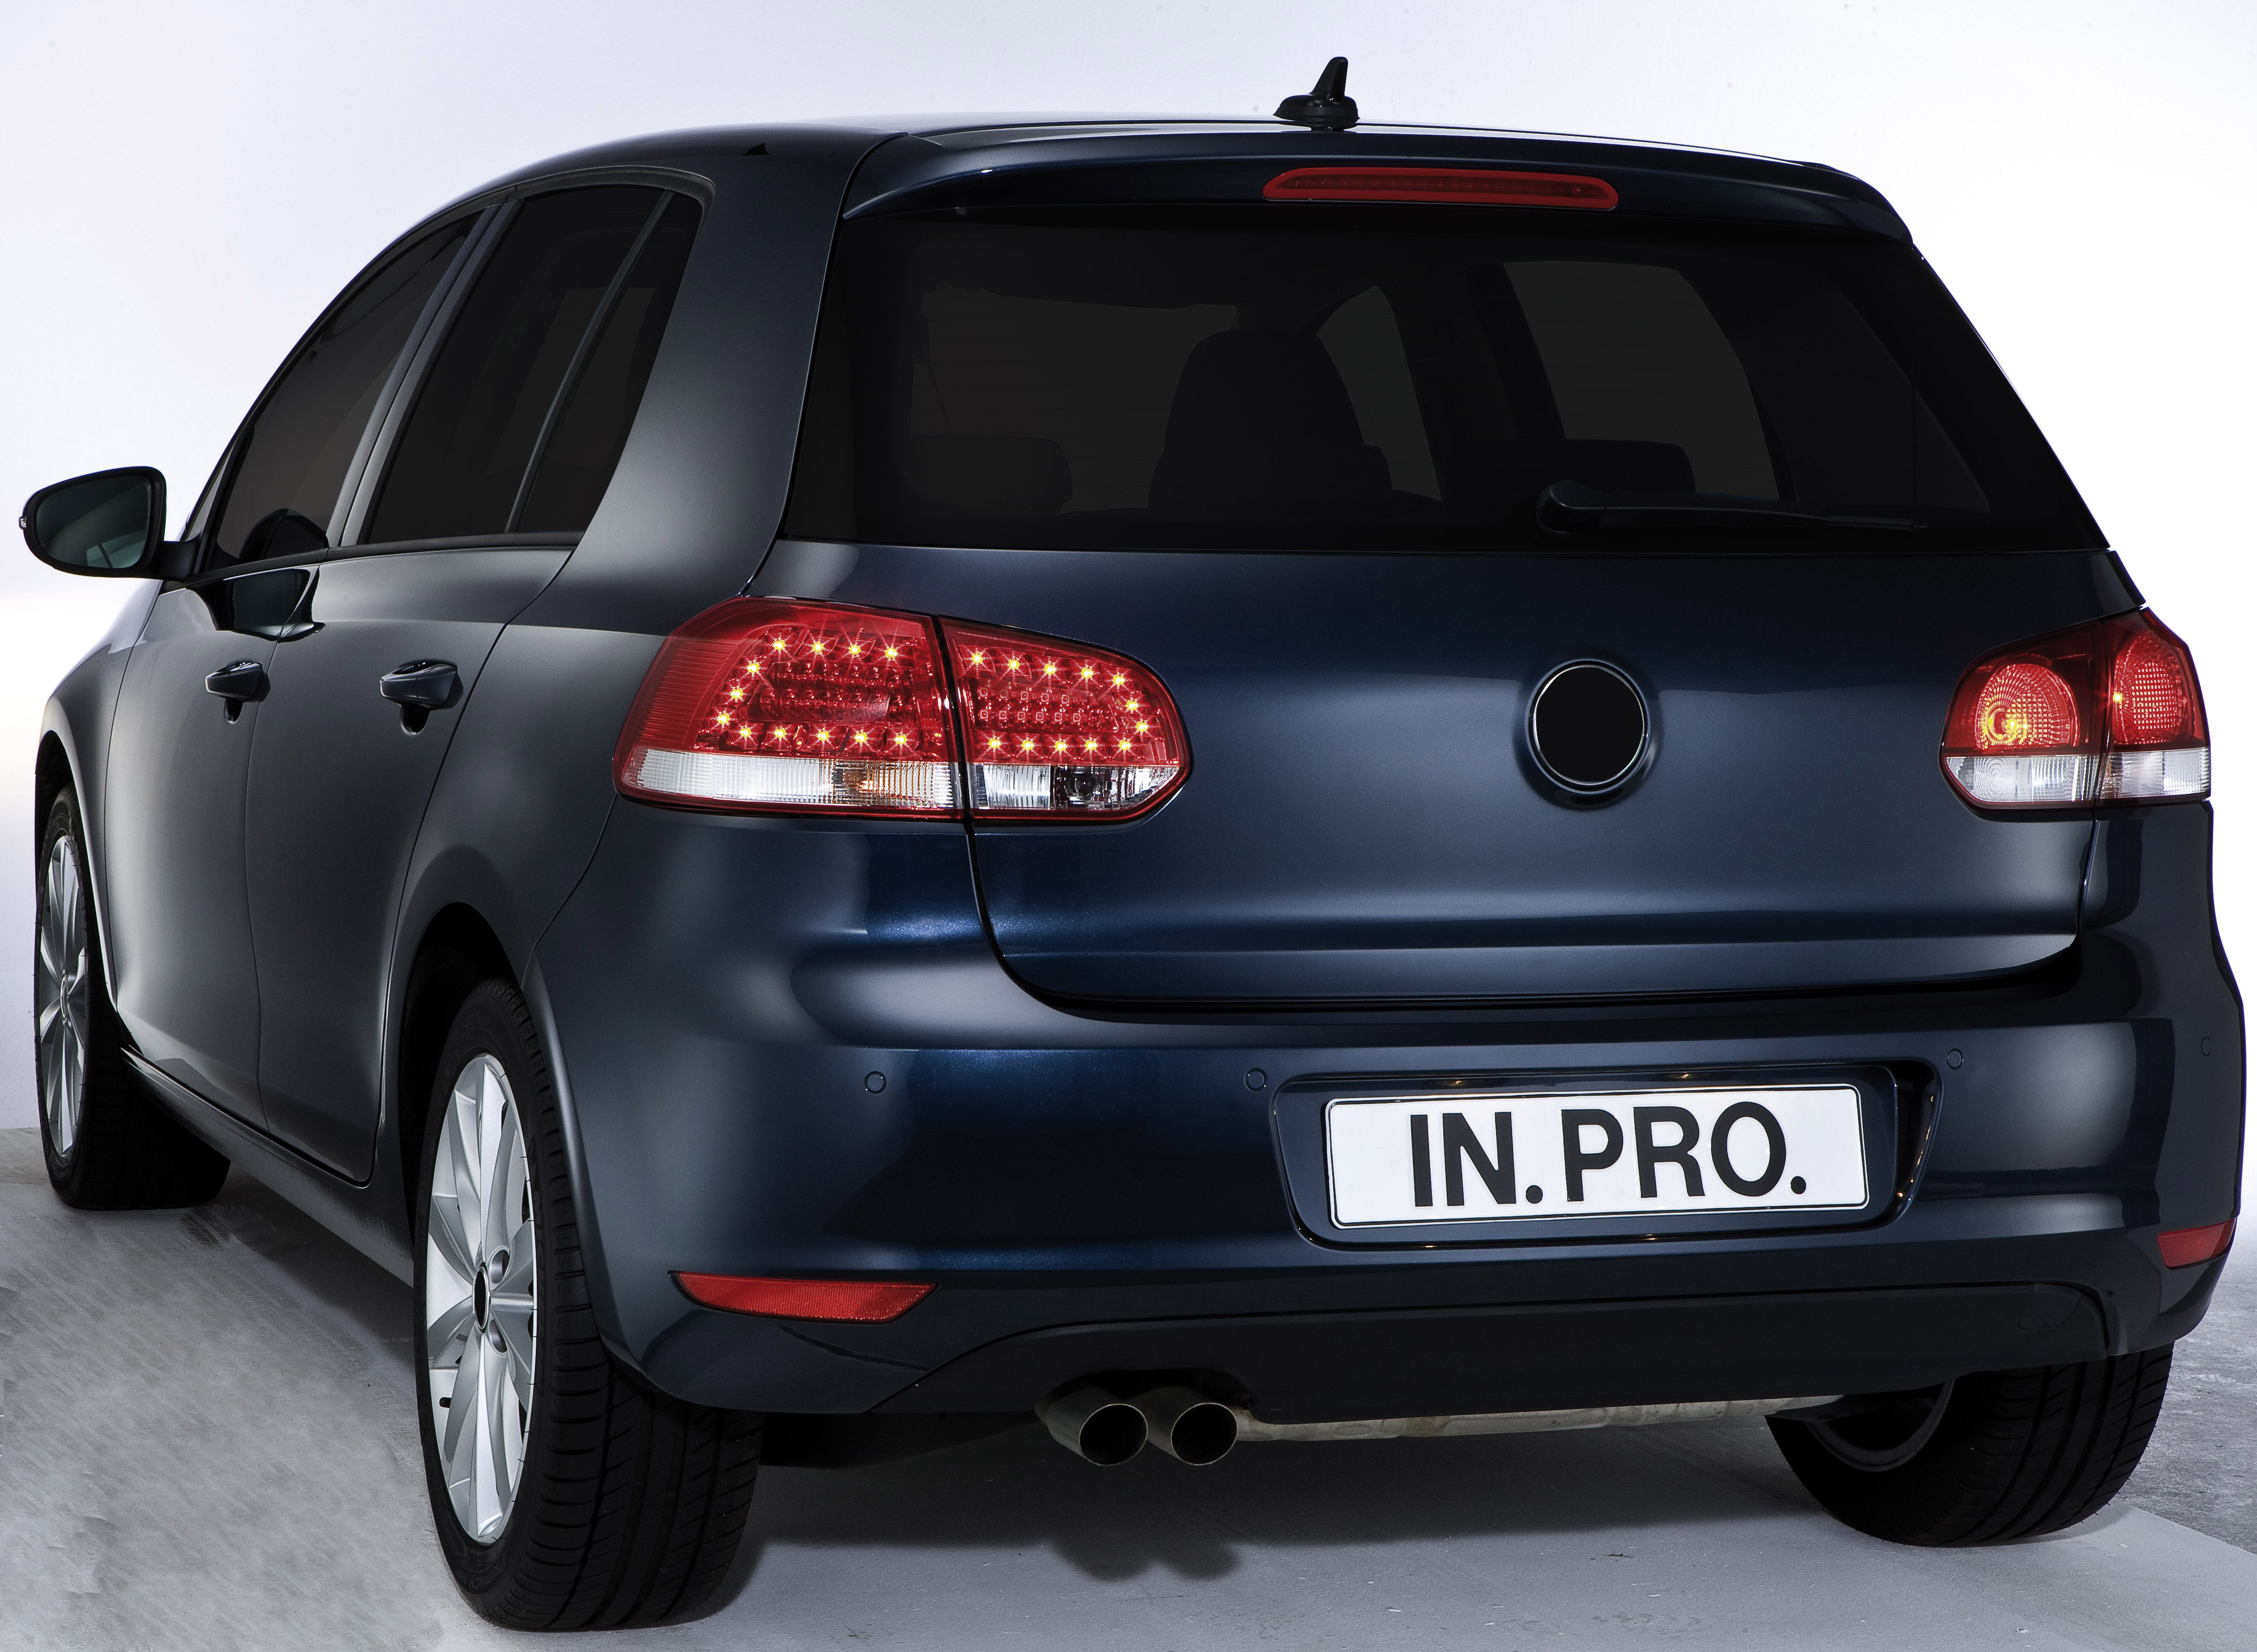 inpro LED Golf VI on in.pro.´s new LED tail lights for the new Golf